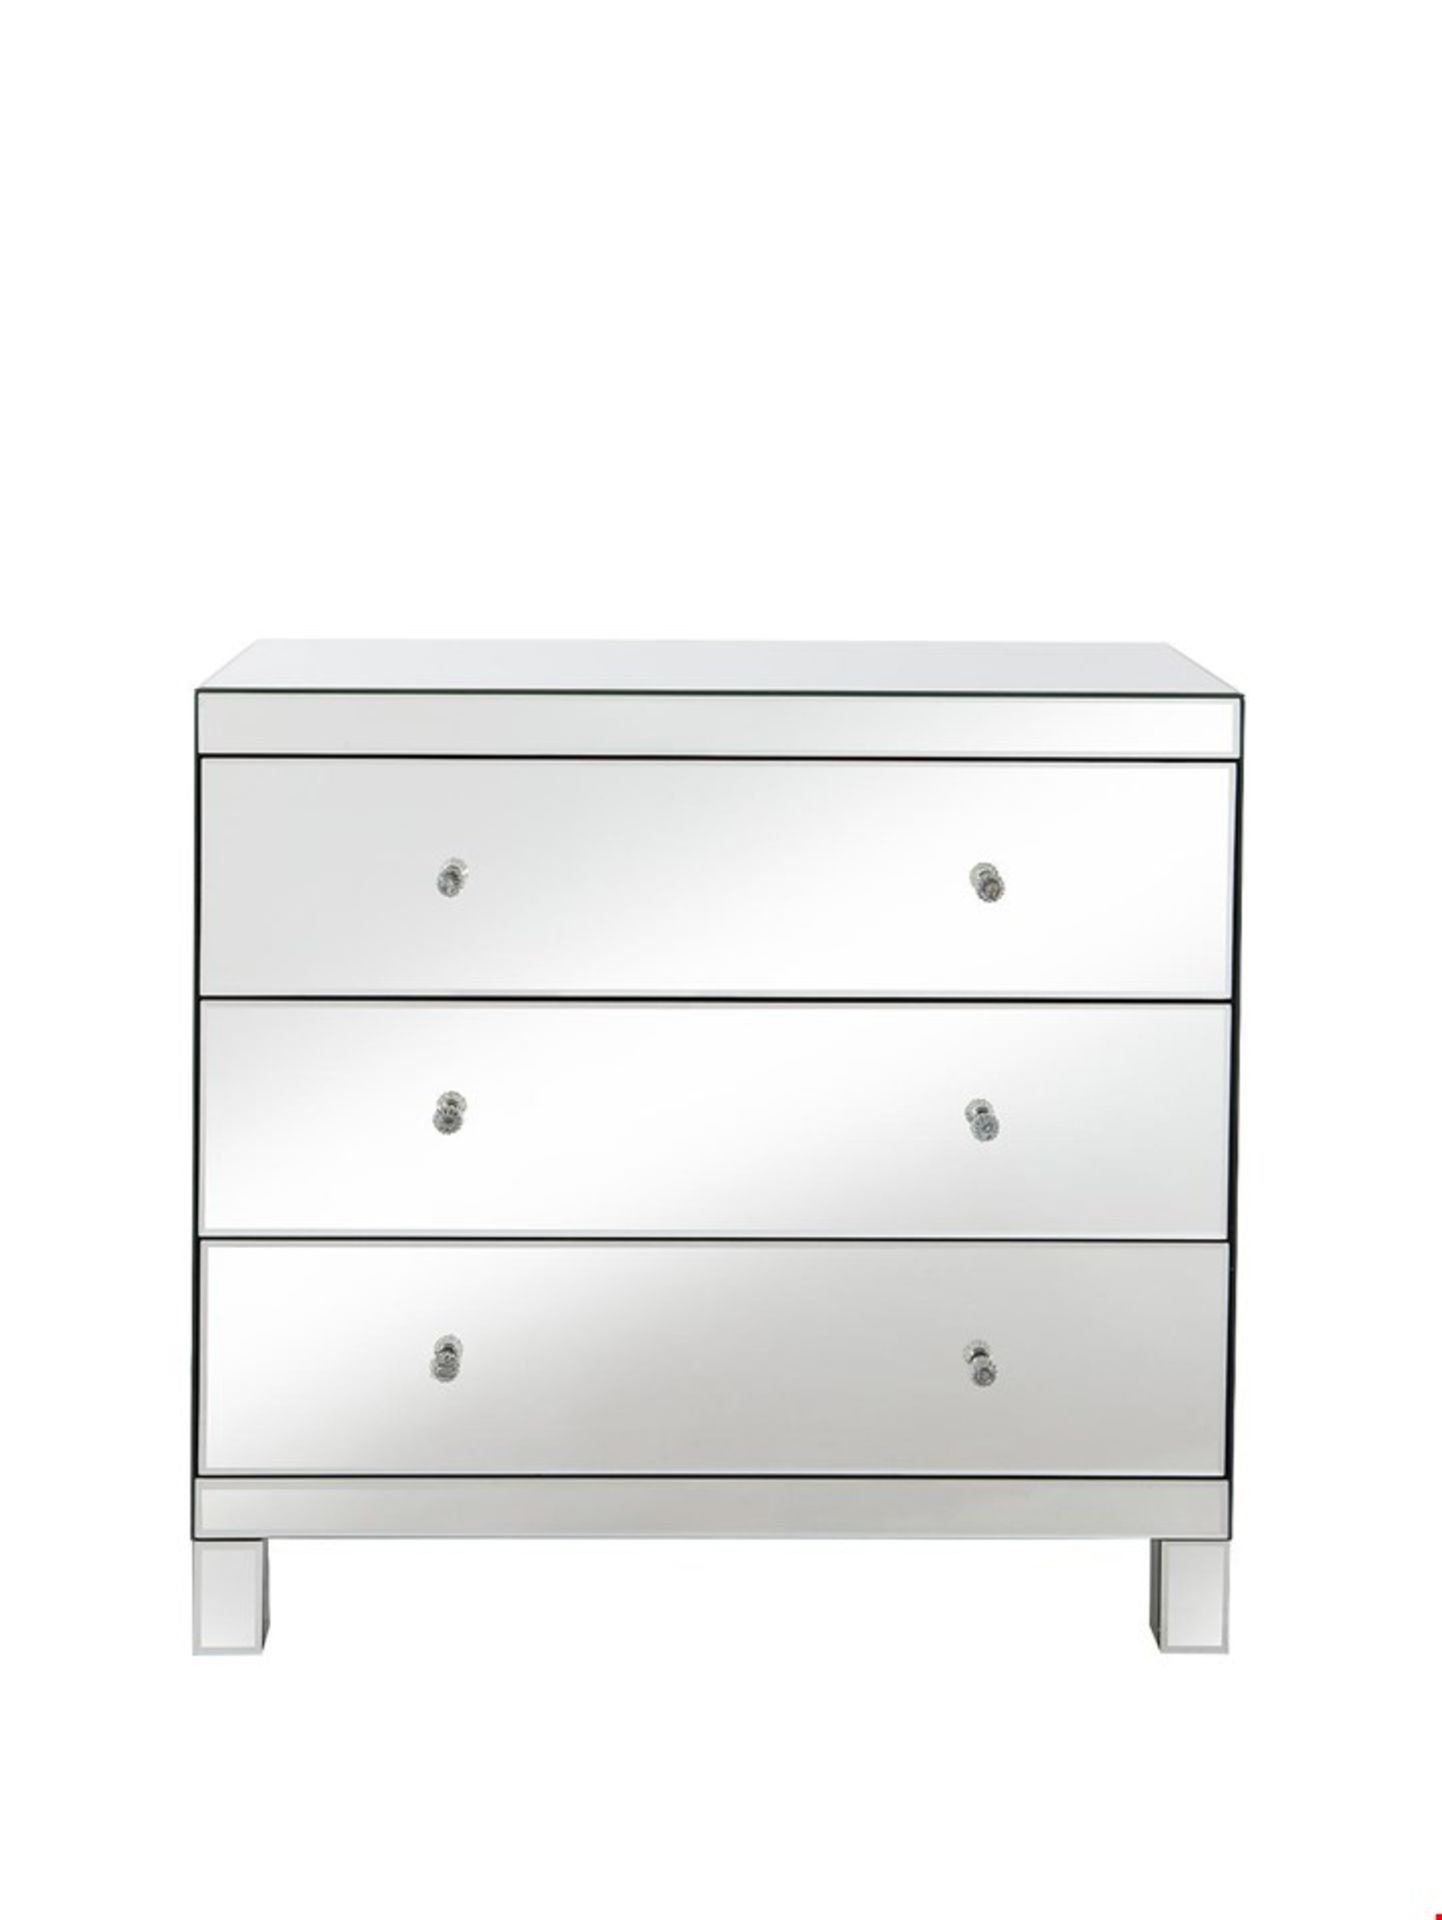 BOXED PARISIAN MIRRORED 3-DRAWER WIDE CHEST (1 BOX) RRP Â£269.00